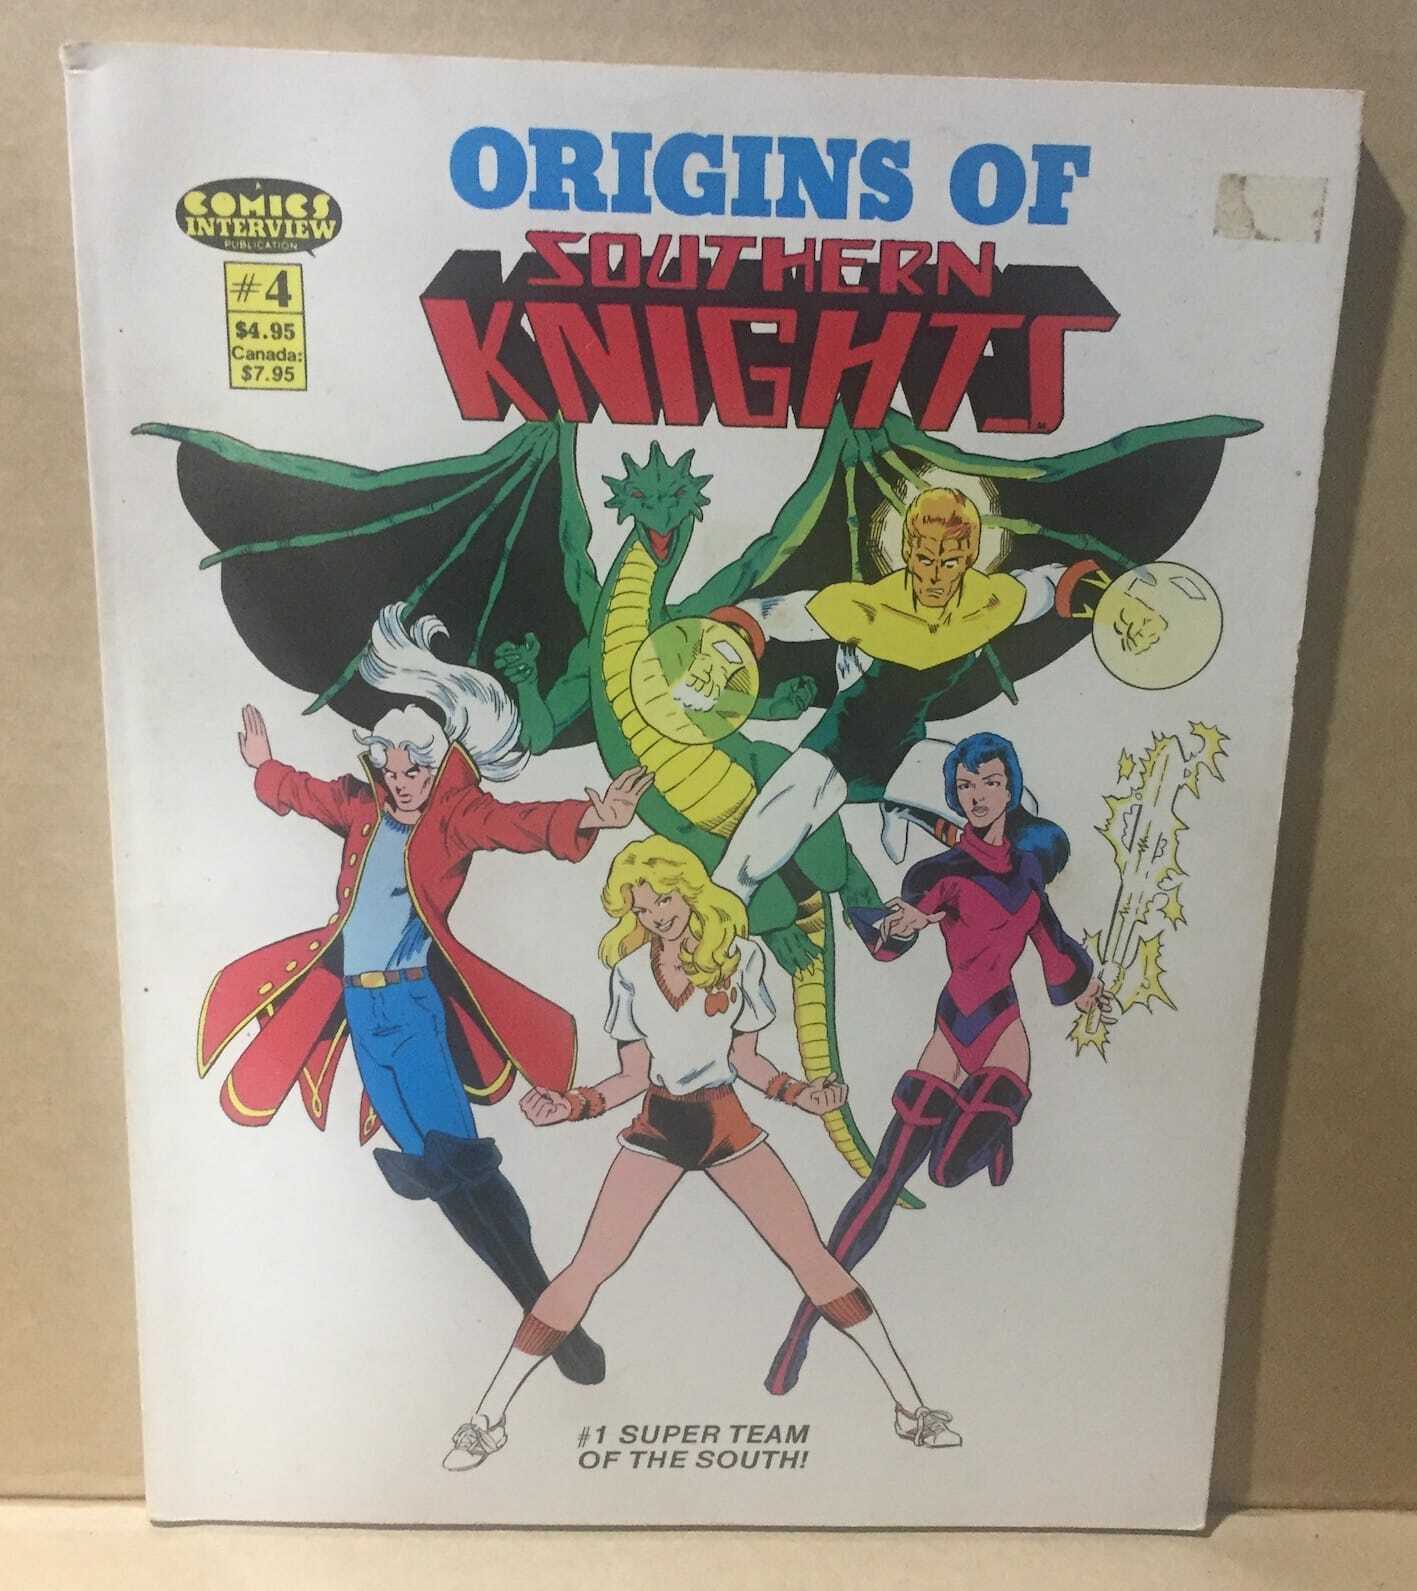 ORIGINS OF SOUTHERN KNIGHTS #4 COMIC BOOK